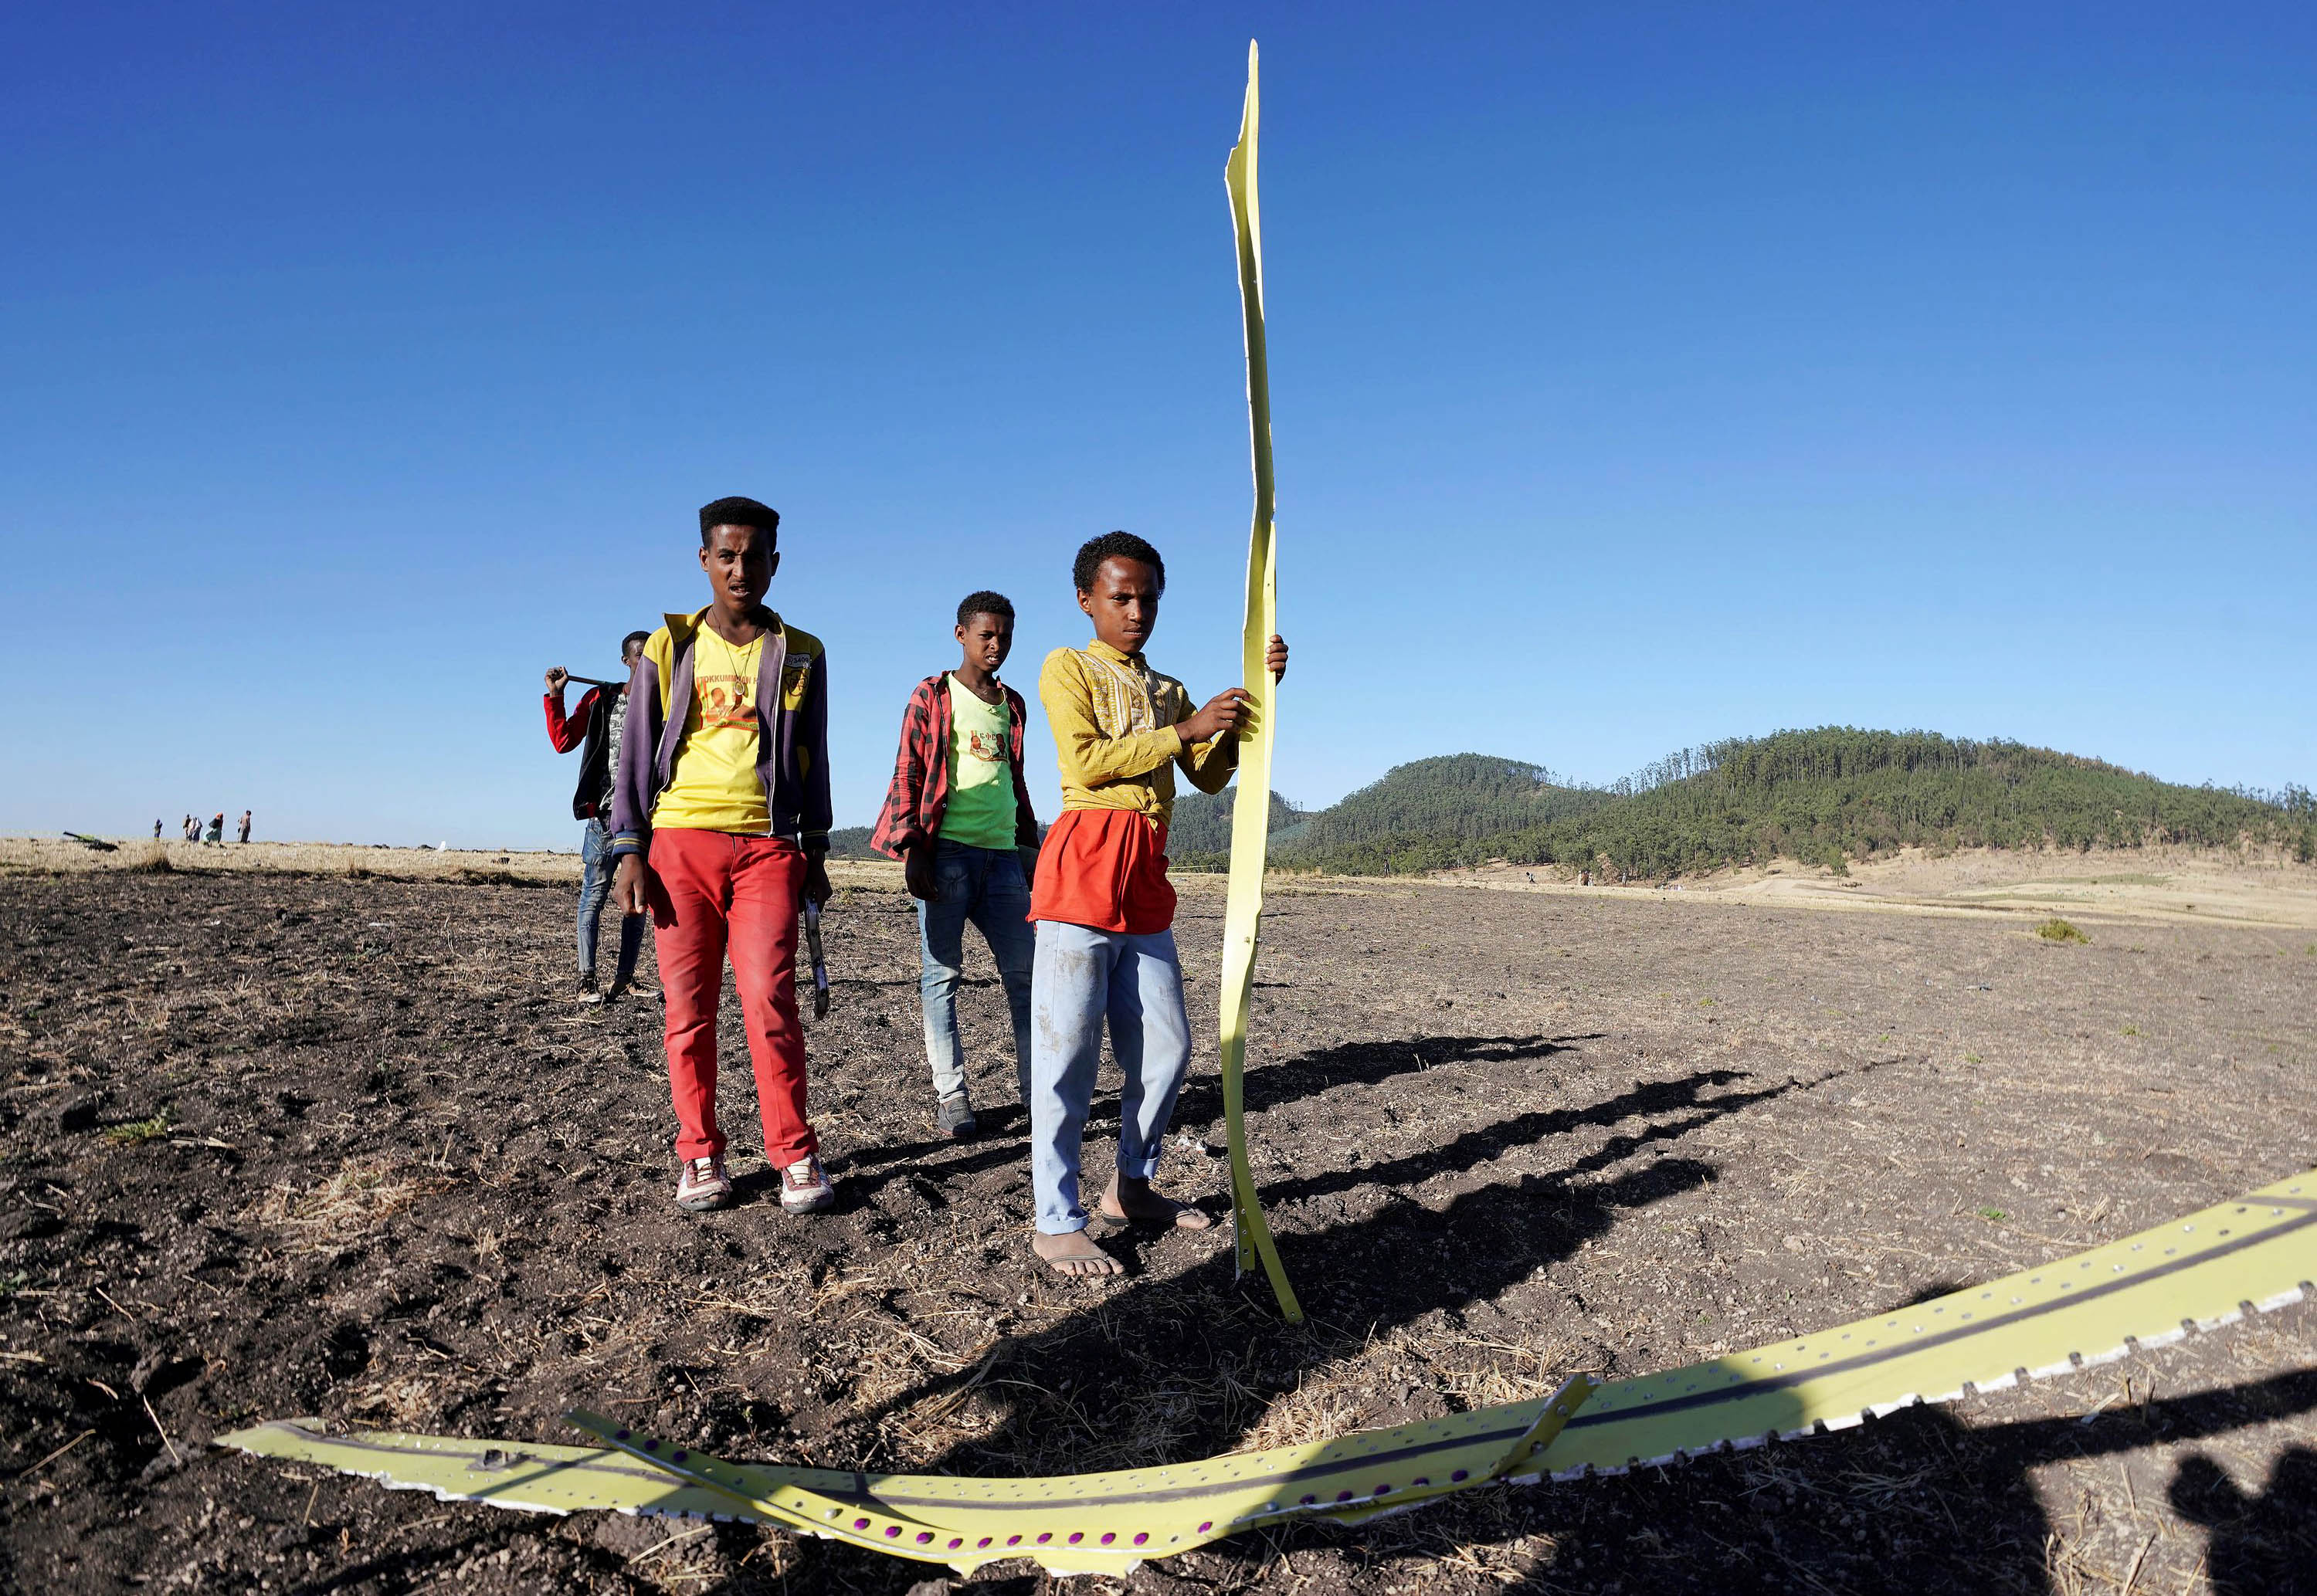 Local residents collect debris at the scene where Ethiopian Airlines Flight 302 crashed in a wheat field just outside the town of Bishoftu, 62 kilometers southeast of Addis Ababa on March 10, 2019 in Addis Ababa, Ethiopia. (Photo by Jemal Countess/Getty Images)